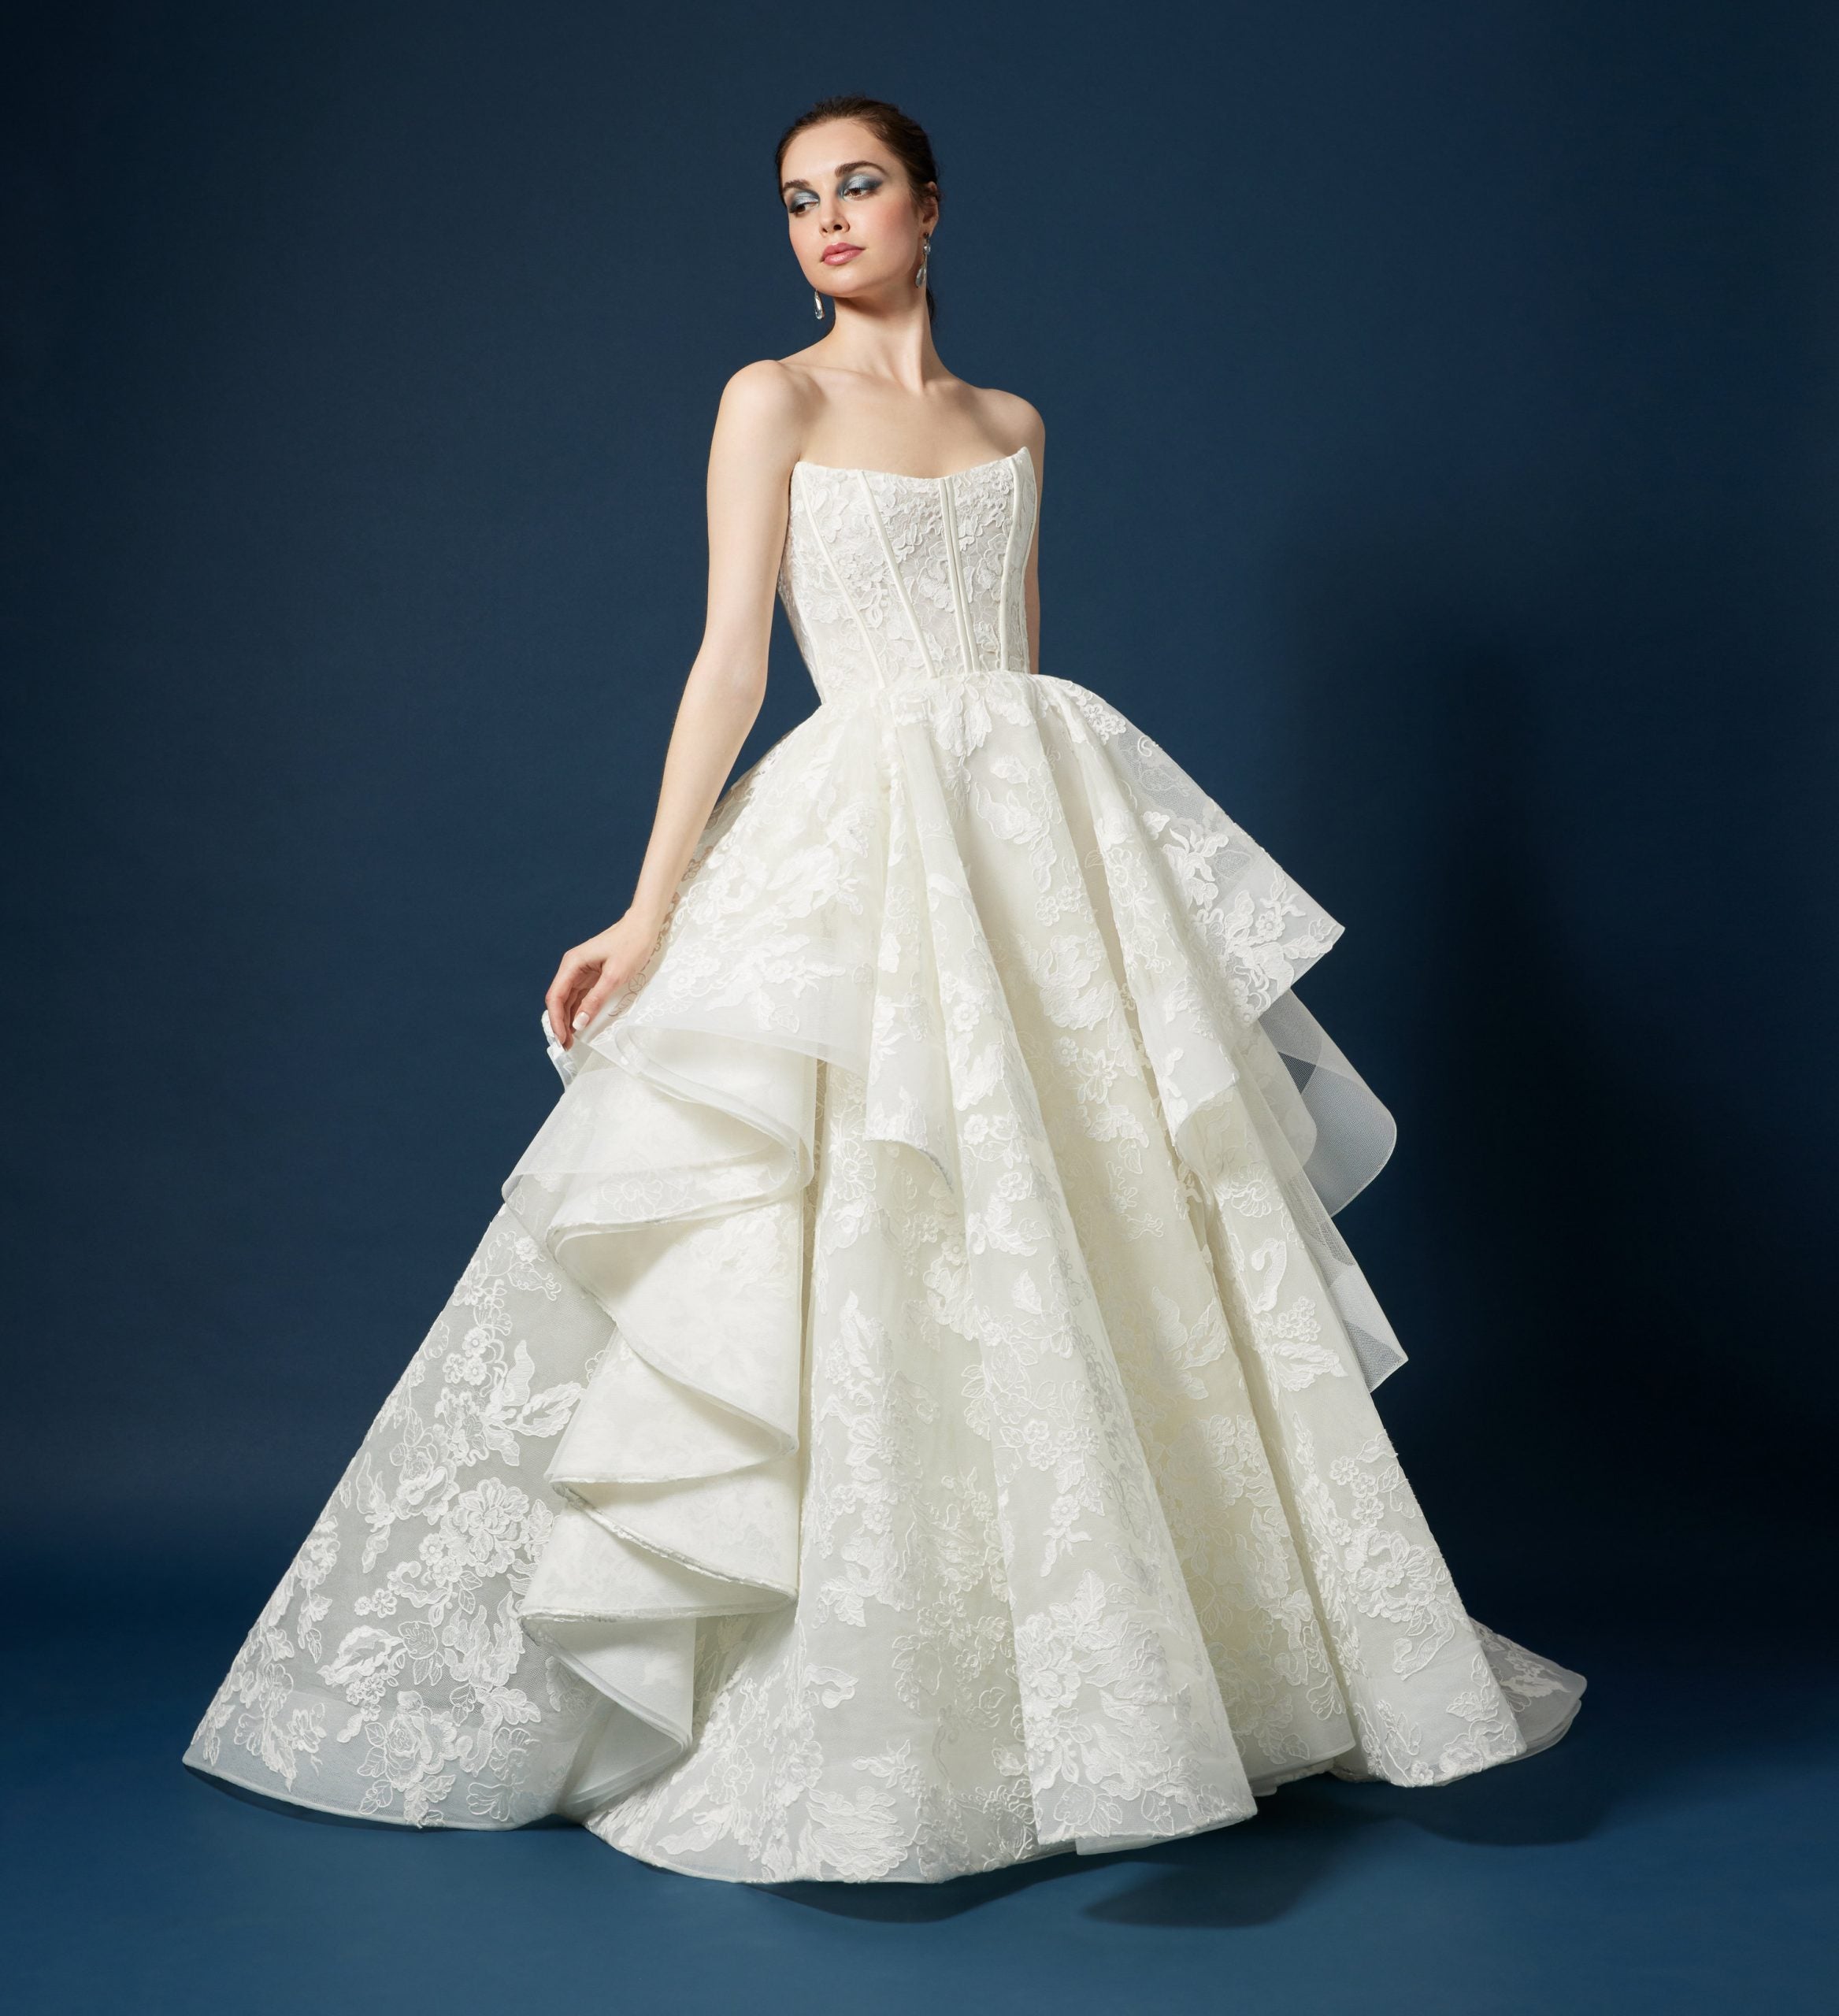 Romantic Tiered Lace Ball Gown by Lazaro - Image 1